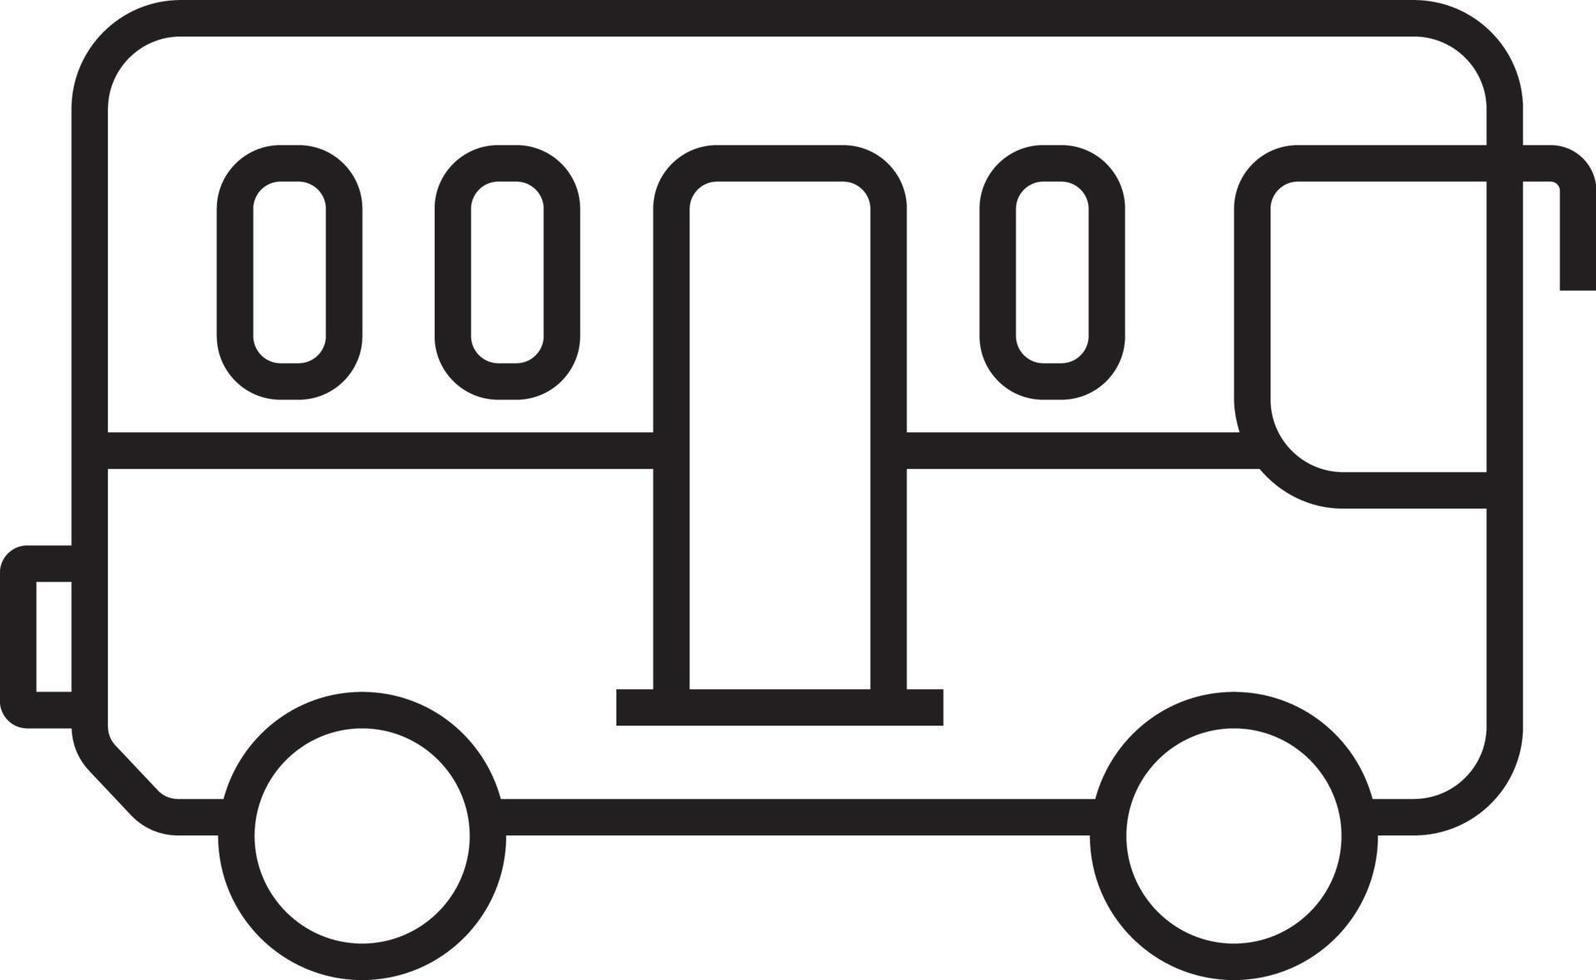 Bus Transportation icon people icons with black outline style. Vehicle, symbol, transport, line, outline, auto, station, travel, automobile, editable, pictogram, isolated, flat. Vector illustration